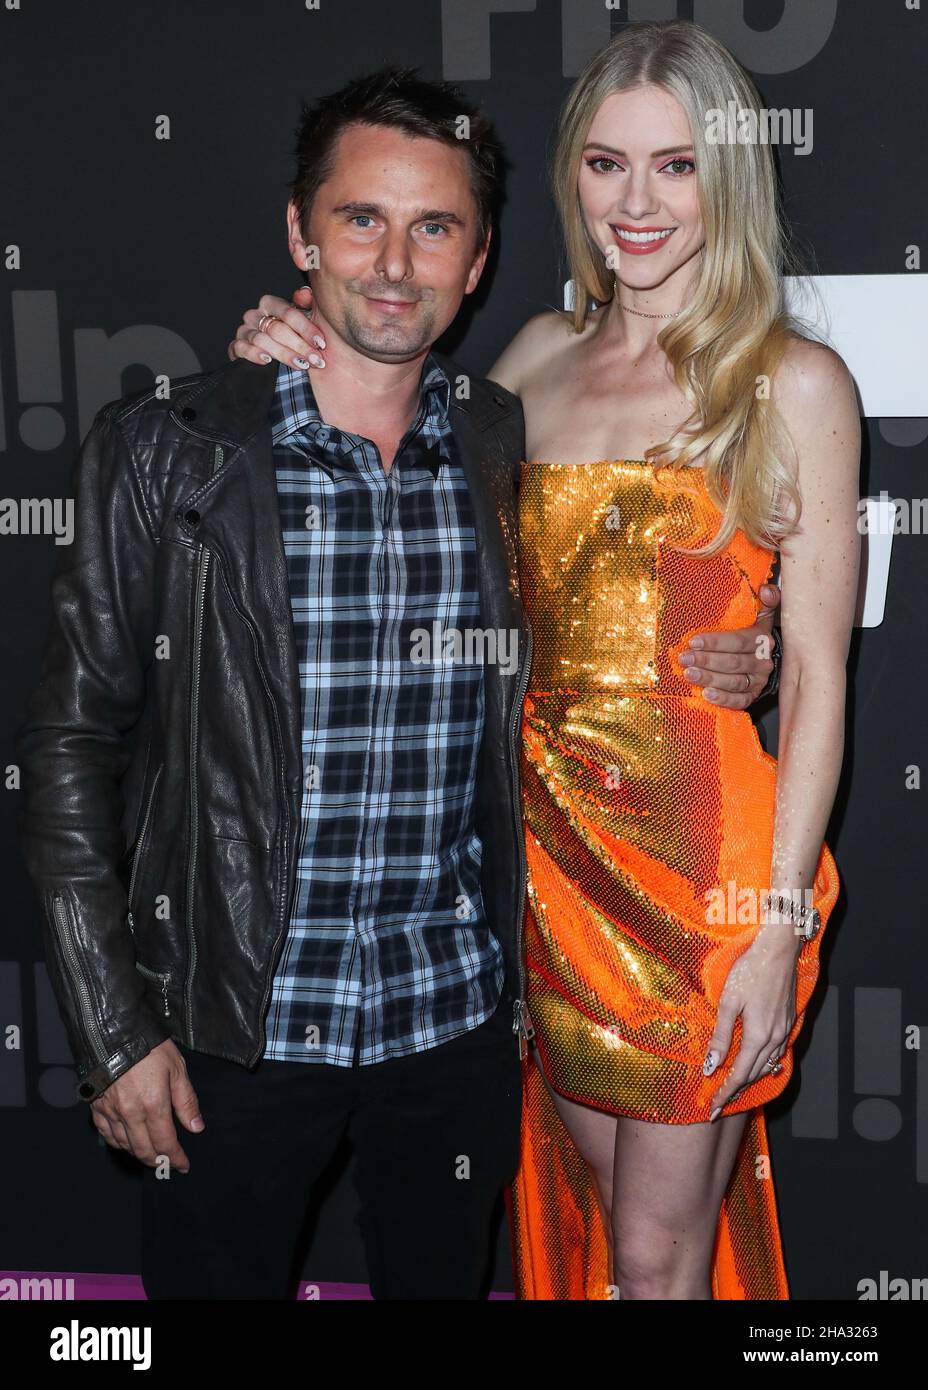 Hollywood, United States. 09th Dec, 2021. HOLLYWOOD, LOS ANGELES, CALIFORNIA, USA - DECEMBER 09: Singer Matt Bellamy and wife/model Elle Evans Bellamy arrive at the Flip Grand Launch Event Hosted by Grammy-Nominated Artist Halsey with Performances by Scout Willis, BIA, and Kehlani held at Avalon Hollywood on December 9, 2021 in Hollywood, Los Angeles, California, United States. (Photo by Xavier Collin/Image Press Agency/Sipa USA) Credit: Sipa USA/Alamy Live News Stock Photo